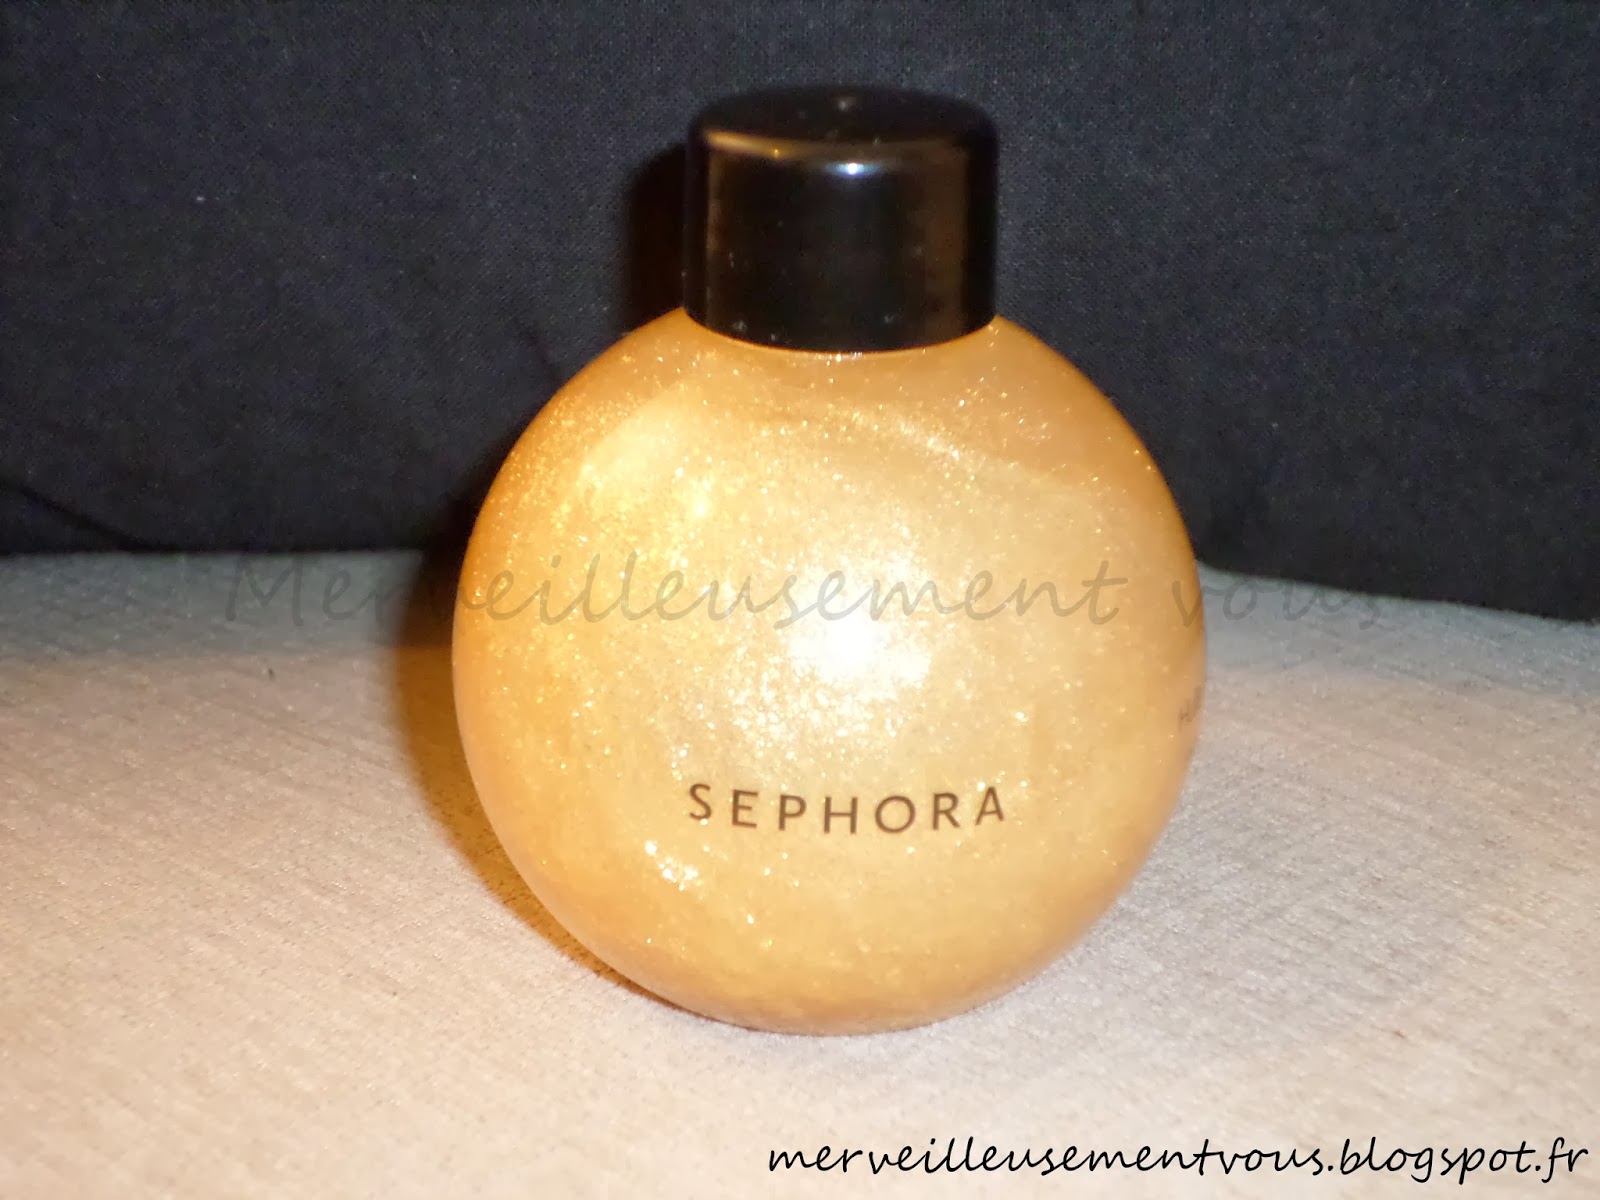 http://www.sephora.fr/Maquillage/Maquillage-Corps/Huile-pailletee-corps-/P1143145